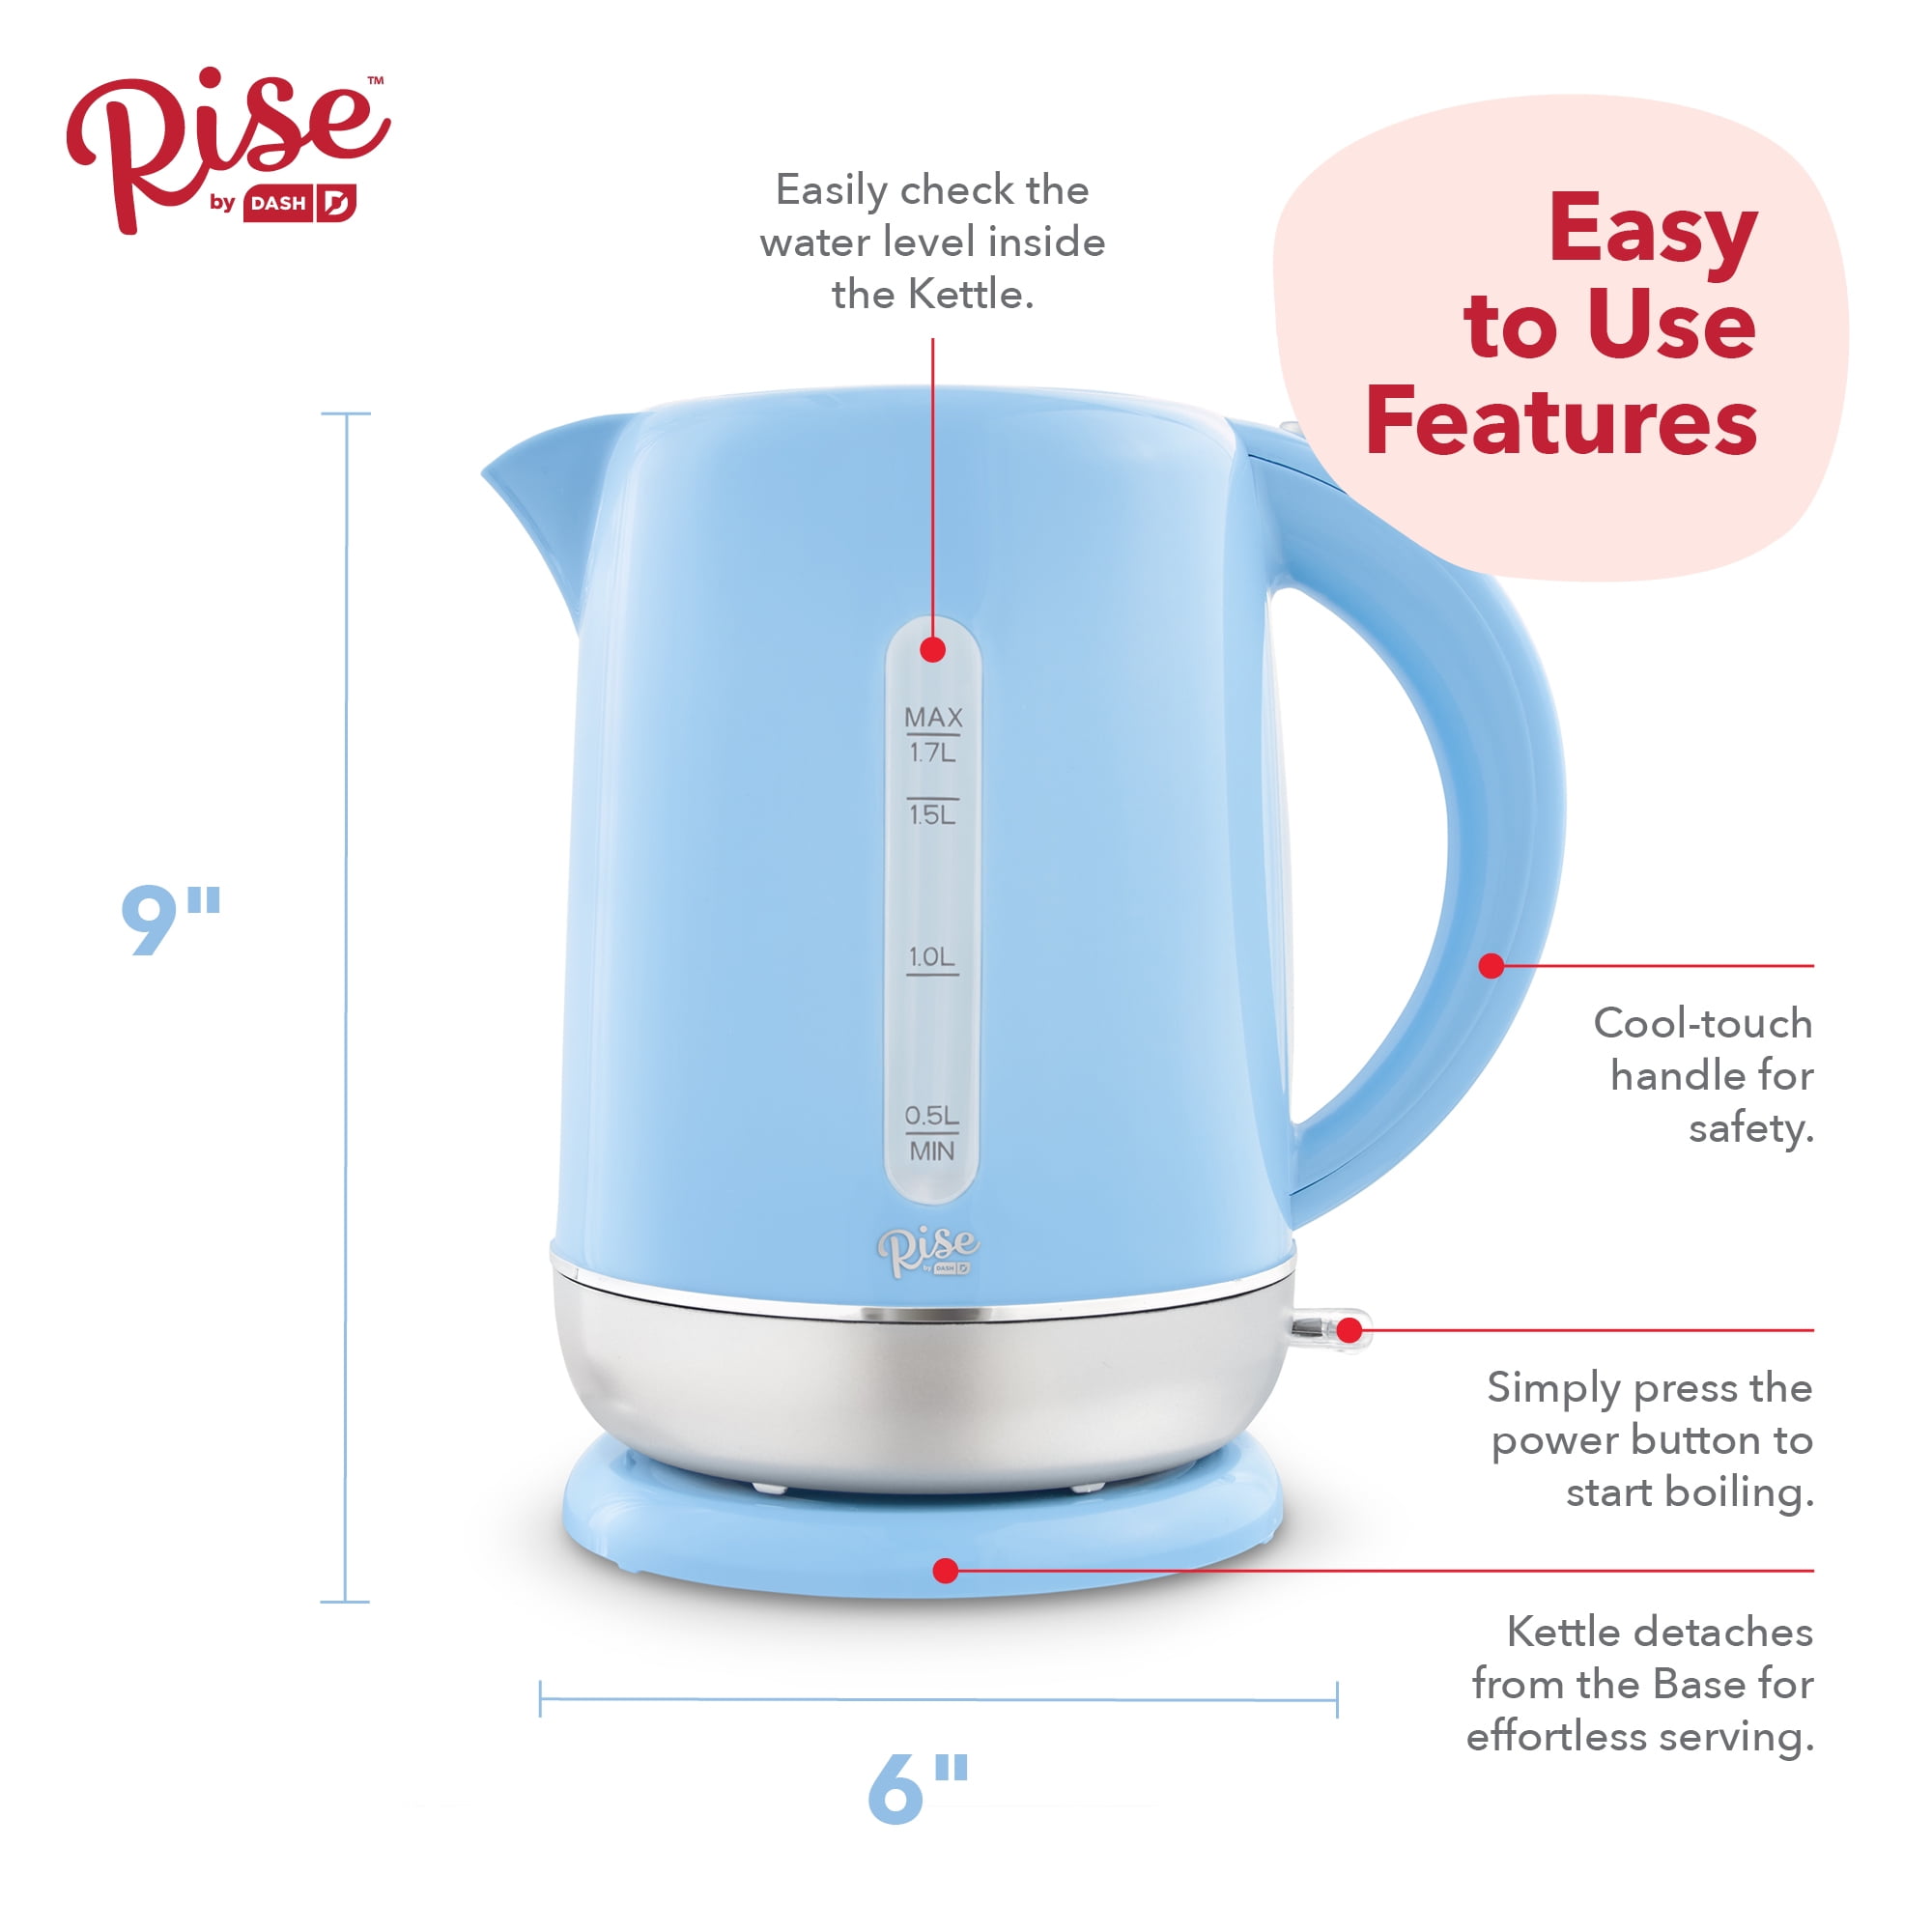  DASH DEK001MW Electric Kettle + Water Heater with